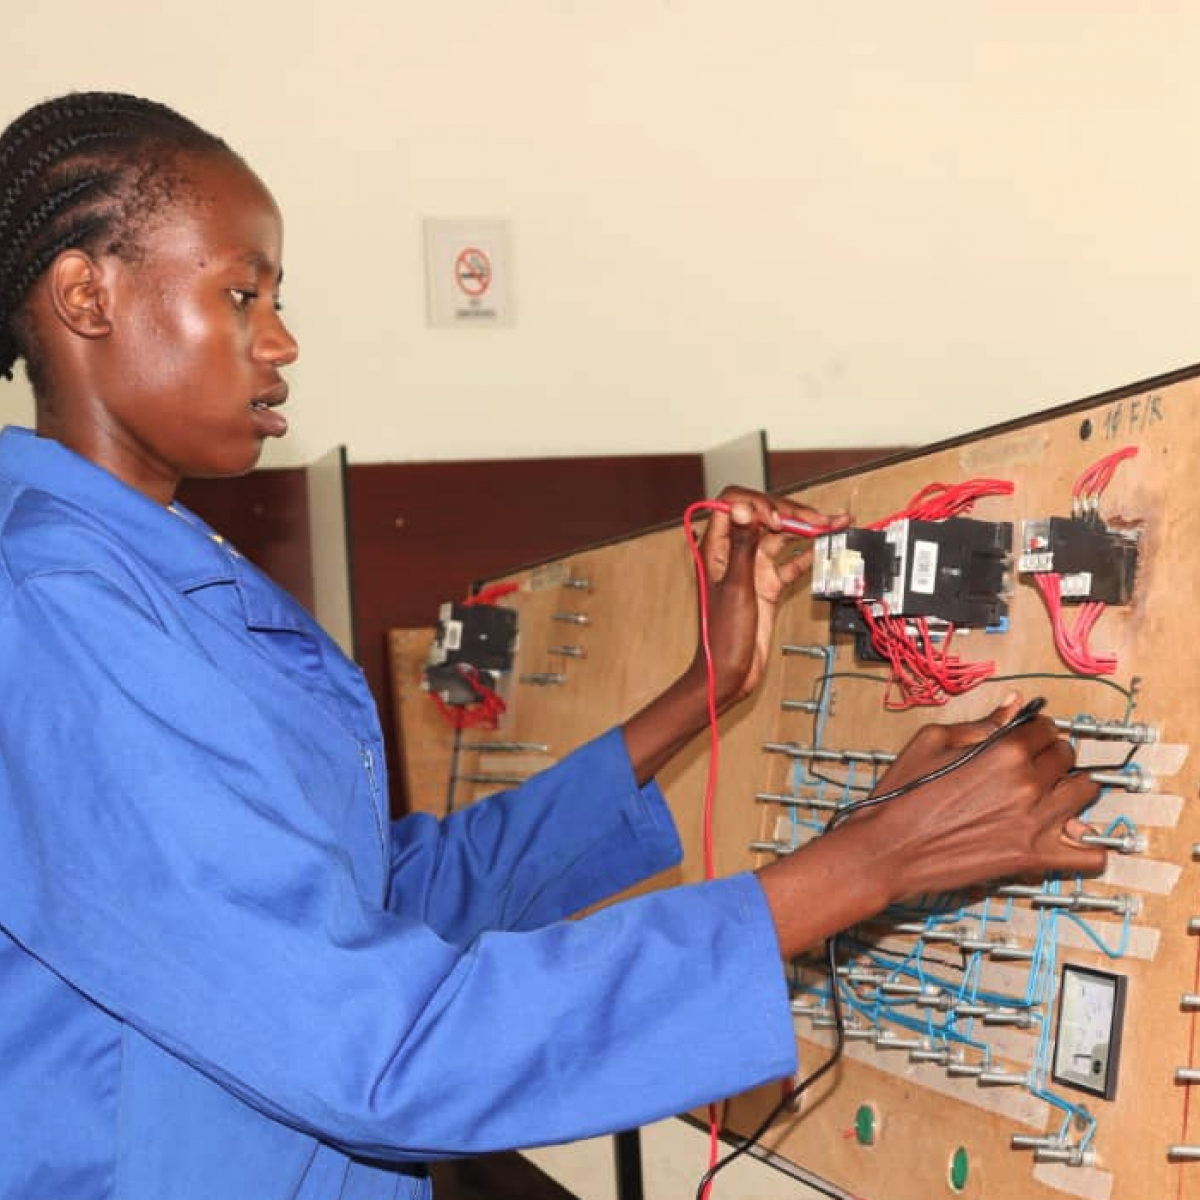 Members of DREAMS through Project Hope learn to become electricians